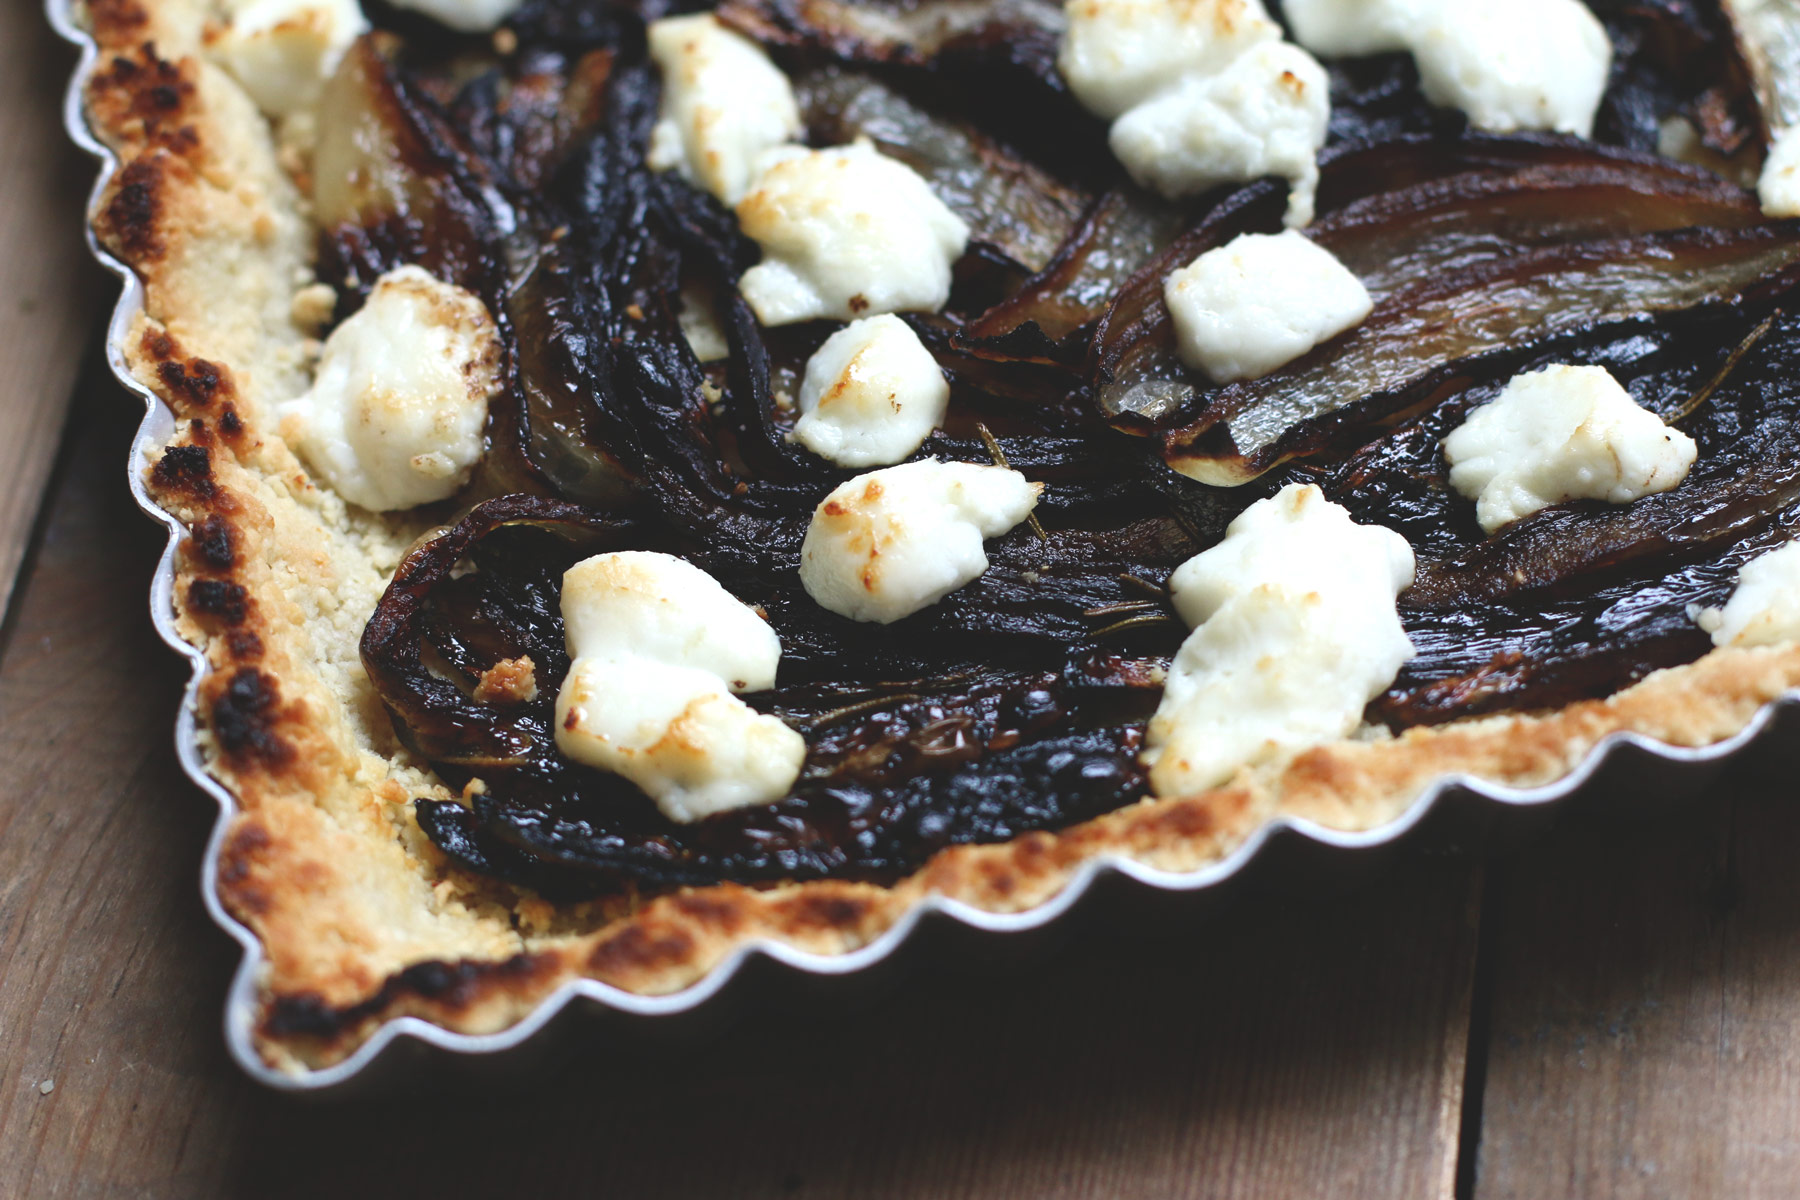 Gluten Free tart with Caramelized Onions